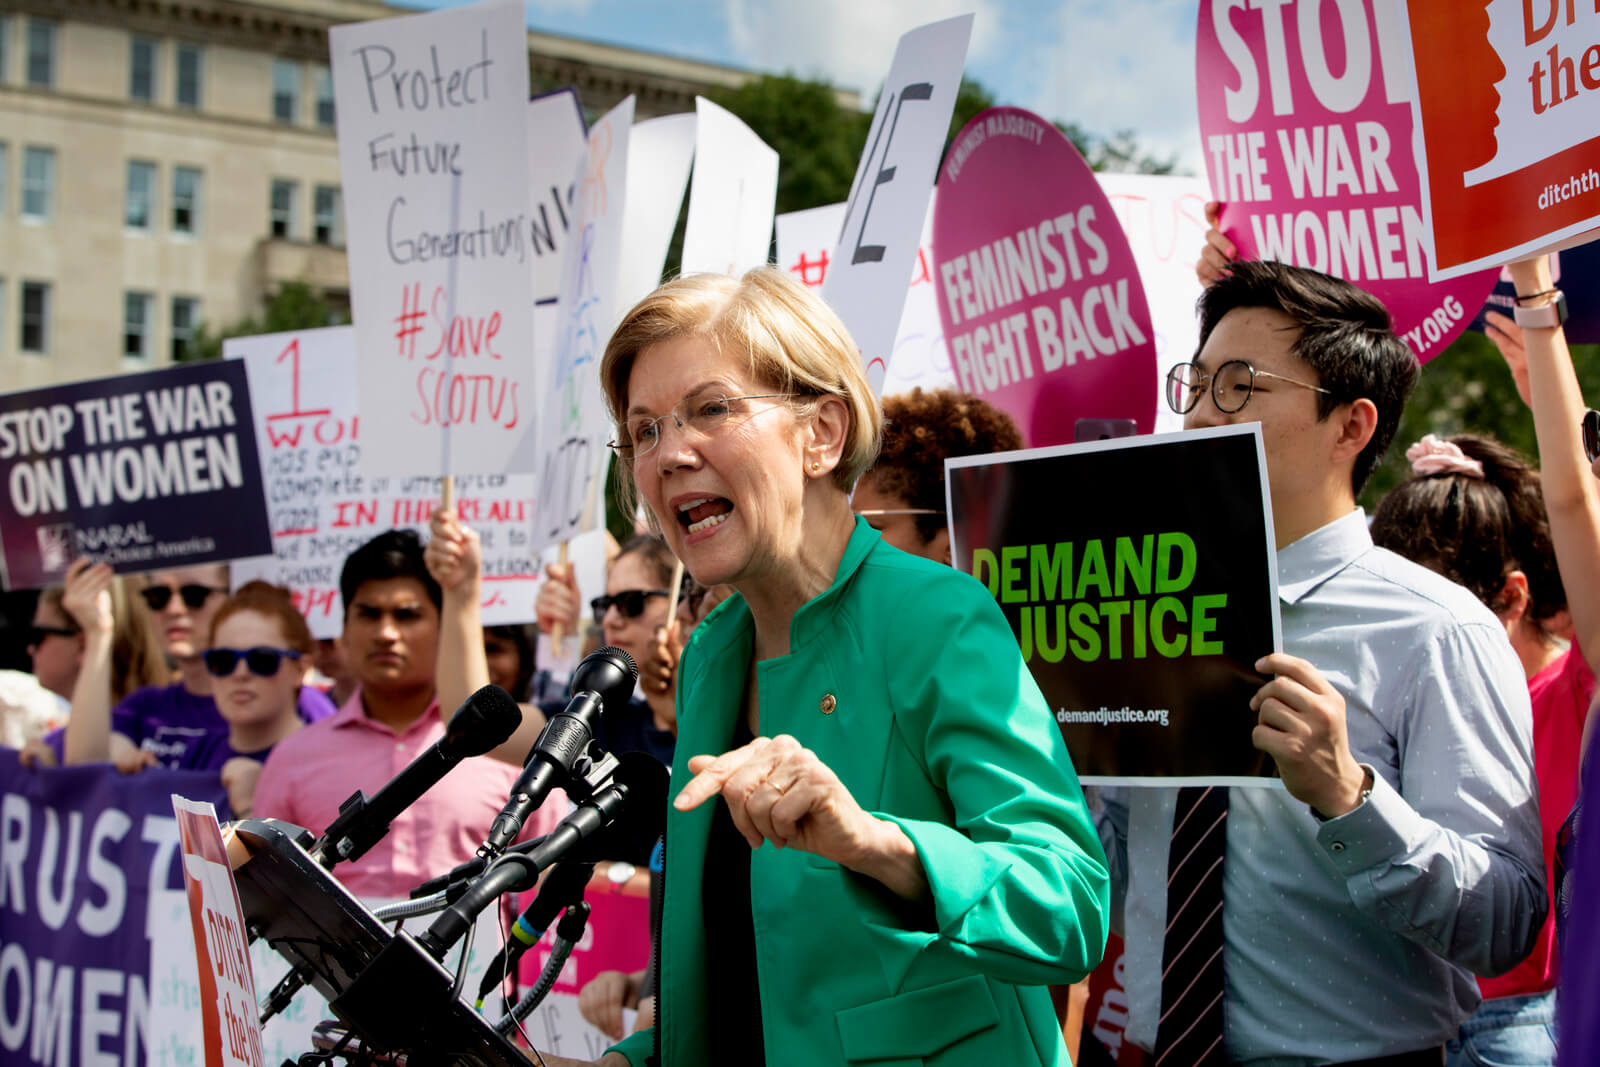 Sen. Elizabeth Warren, D-Mass., joins activists at the Supreme Court as President Donald Trump prepares to choose a replacement for Justice Anthony Kennedy, on Capitol Hill in Washington, June 28, 2018. J. Scott Applewhite | AP